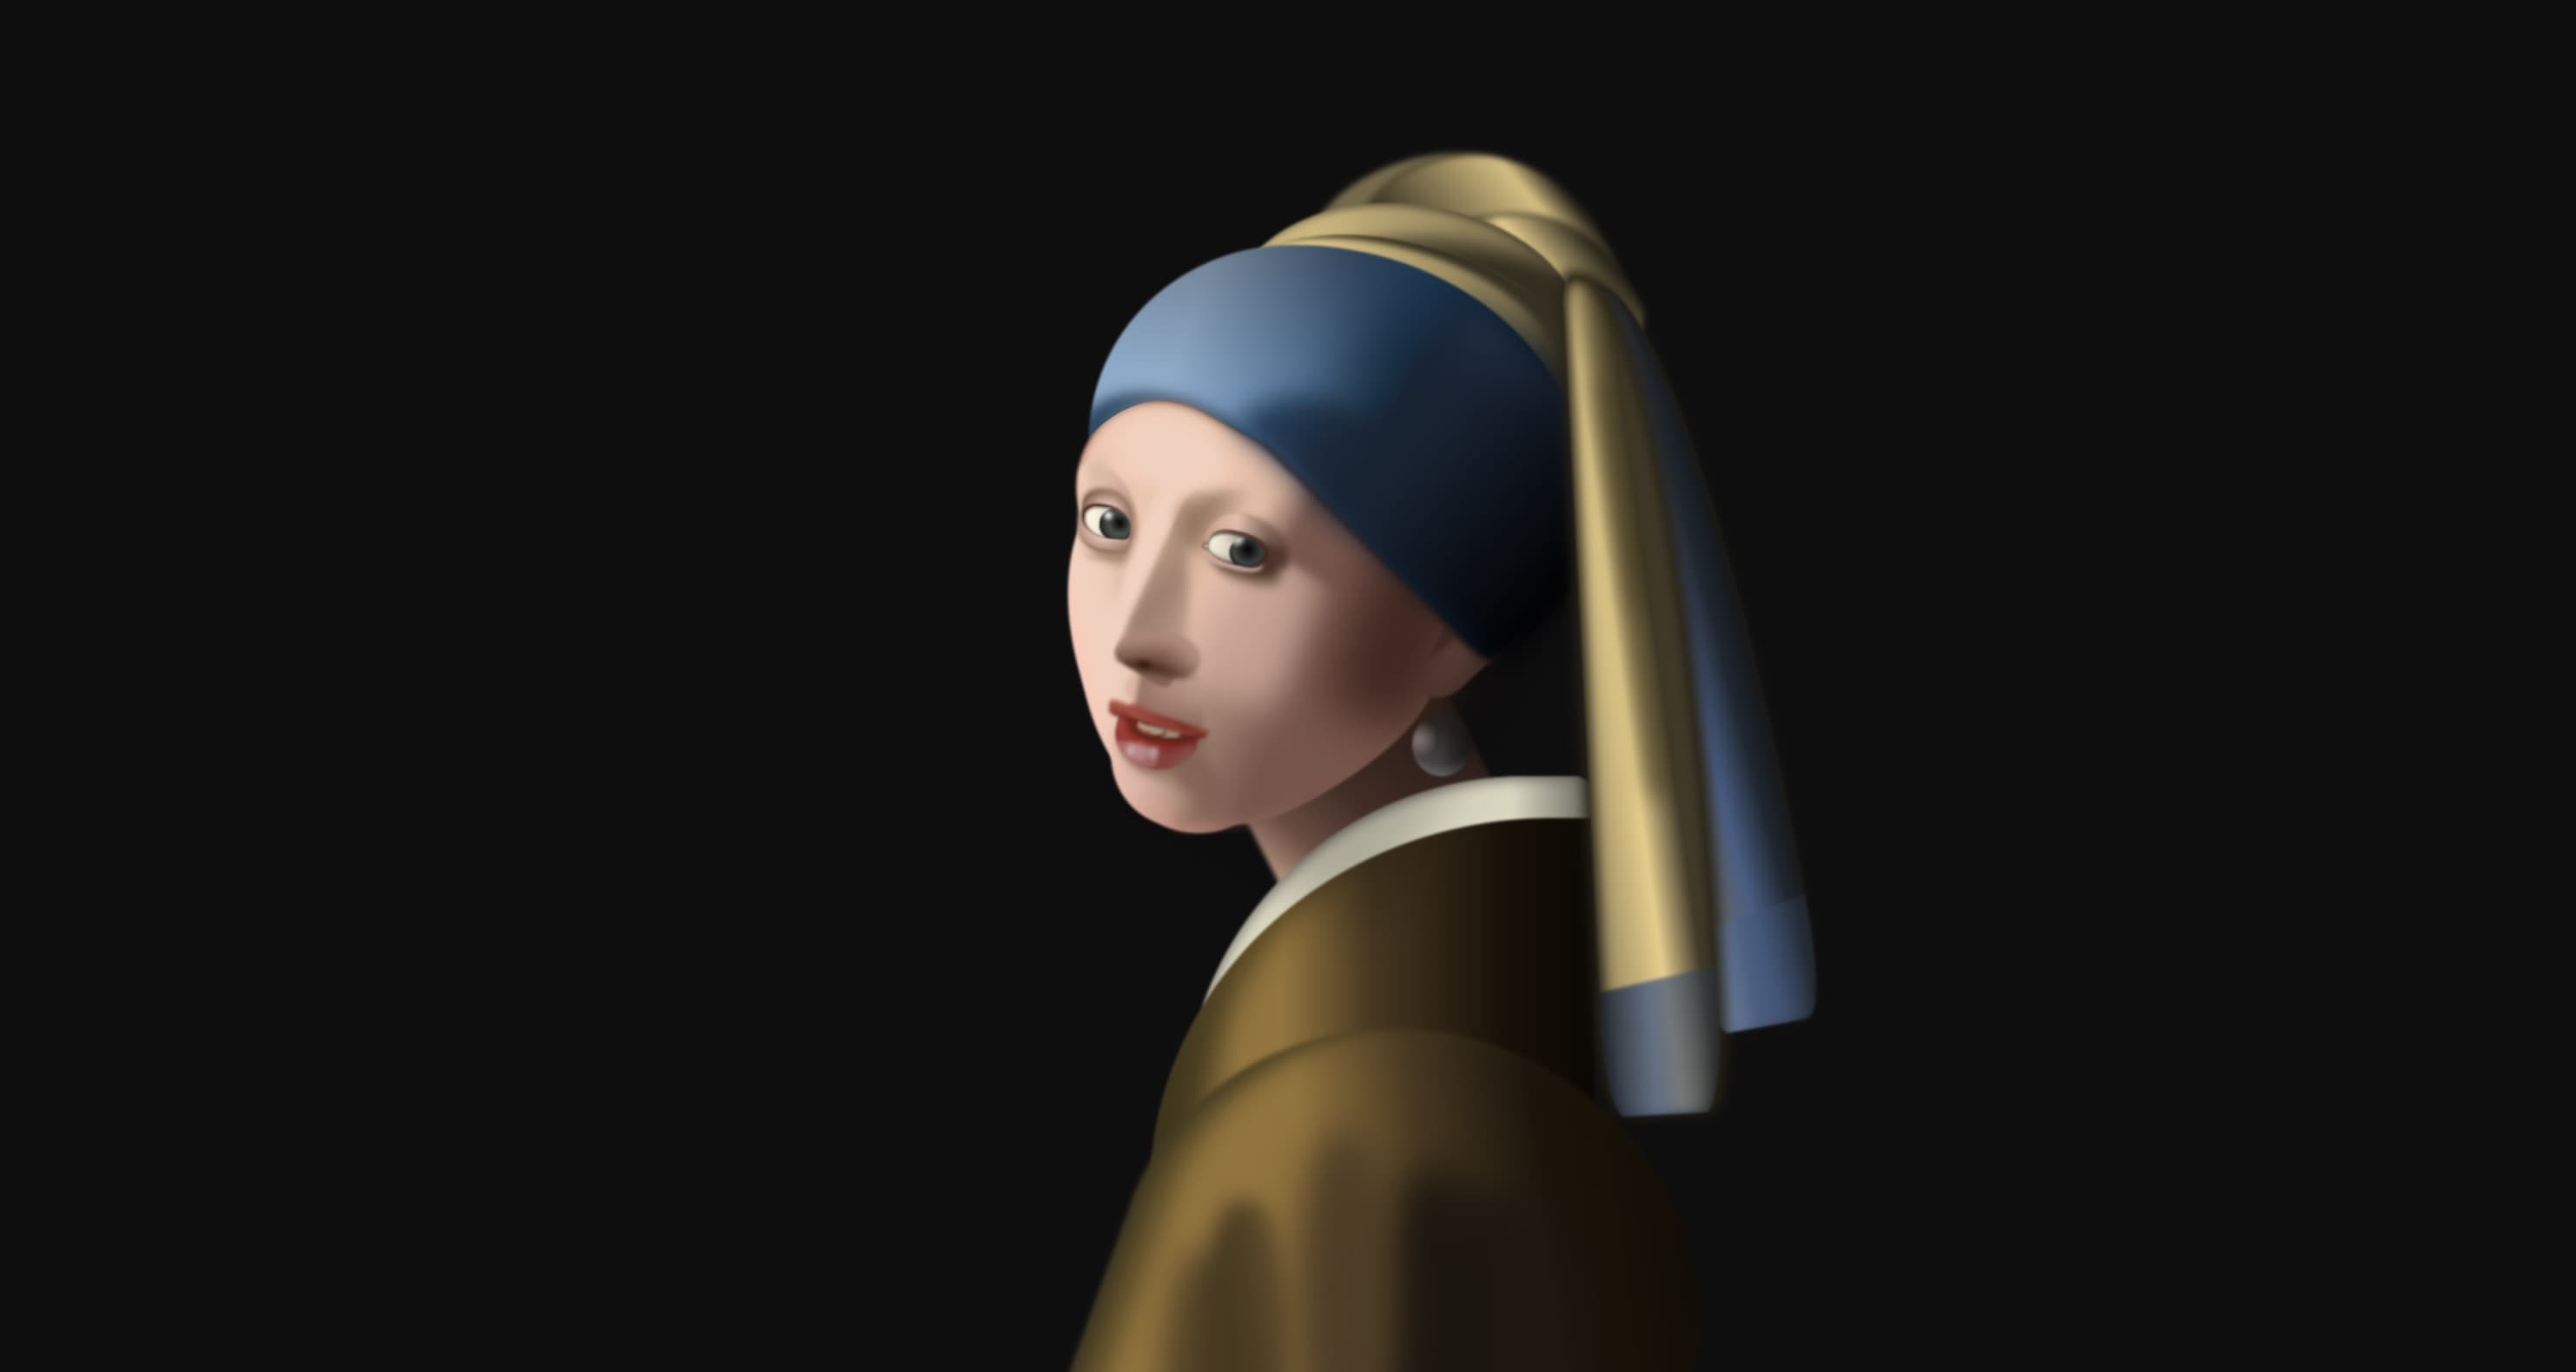 CSS art that looks like an oil painting of a woman